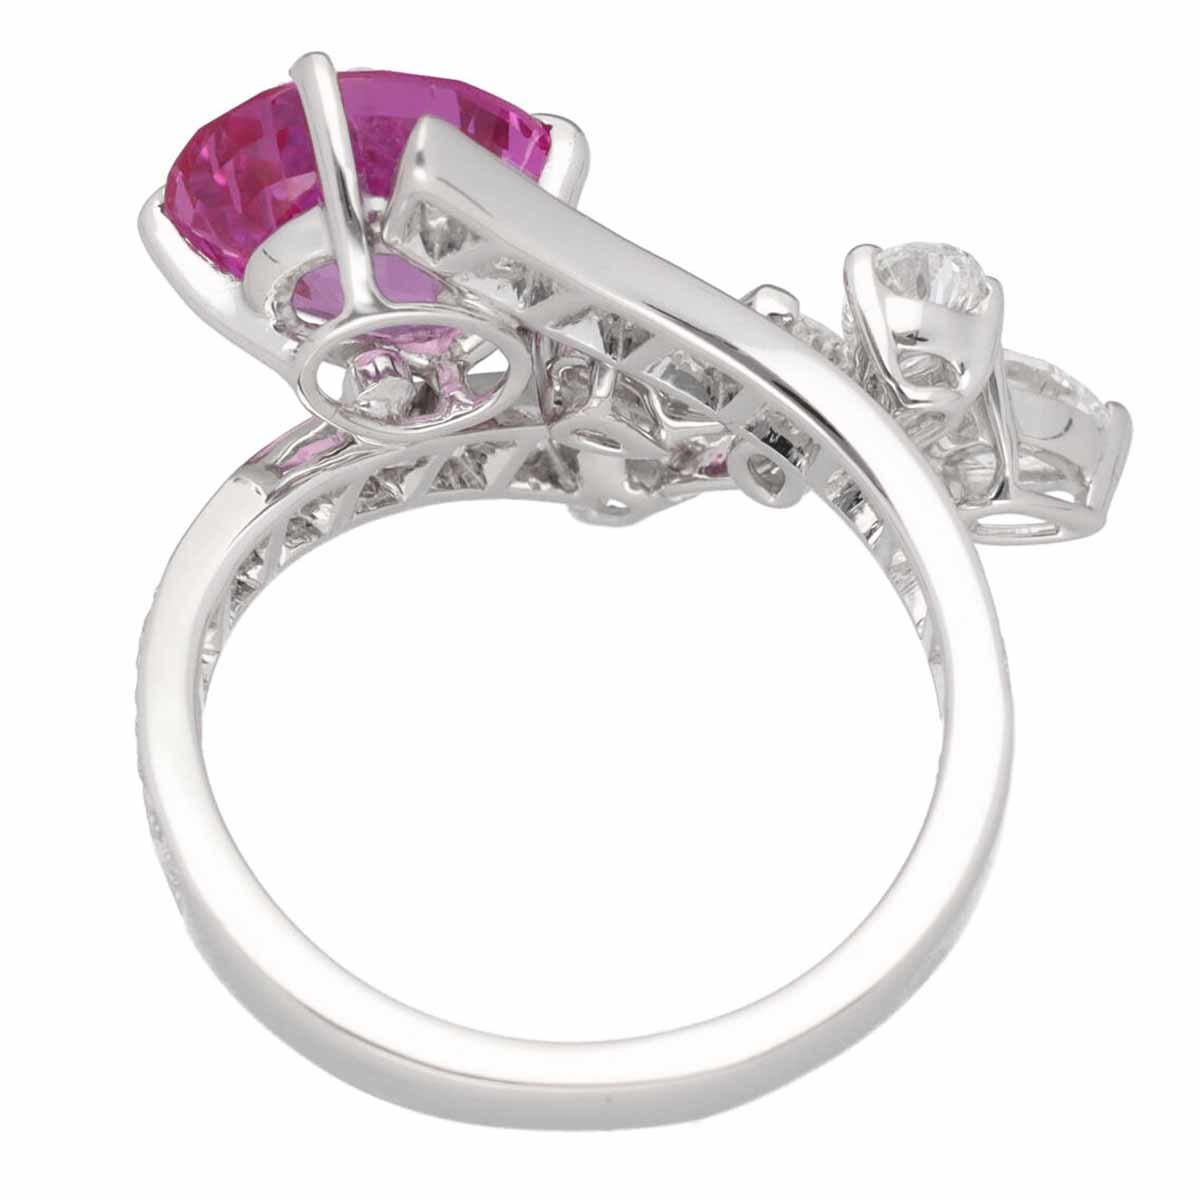 Van Cleef&Arpels Van Cleef & Arpels e Rize Myanma production non heating pink sapphire diamond ring K18WG approximately 8 number judgement document 